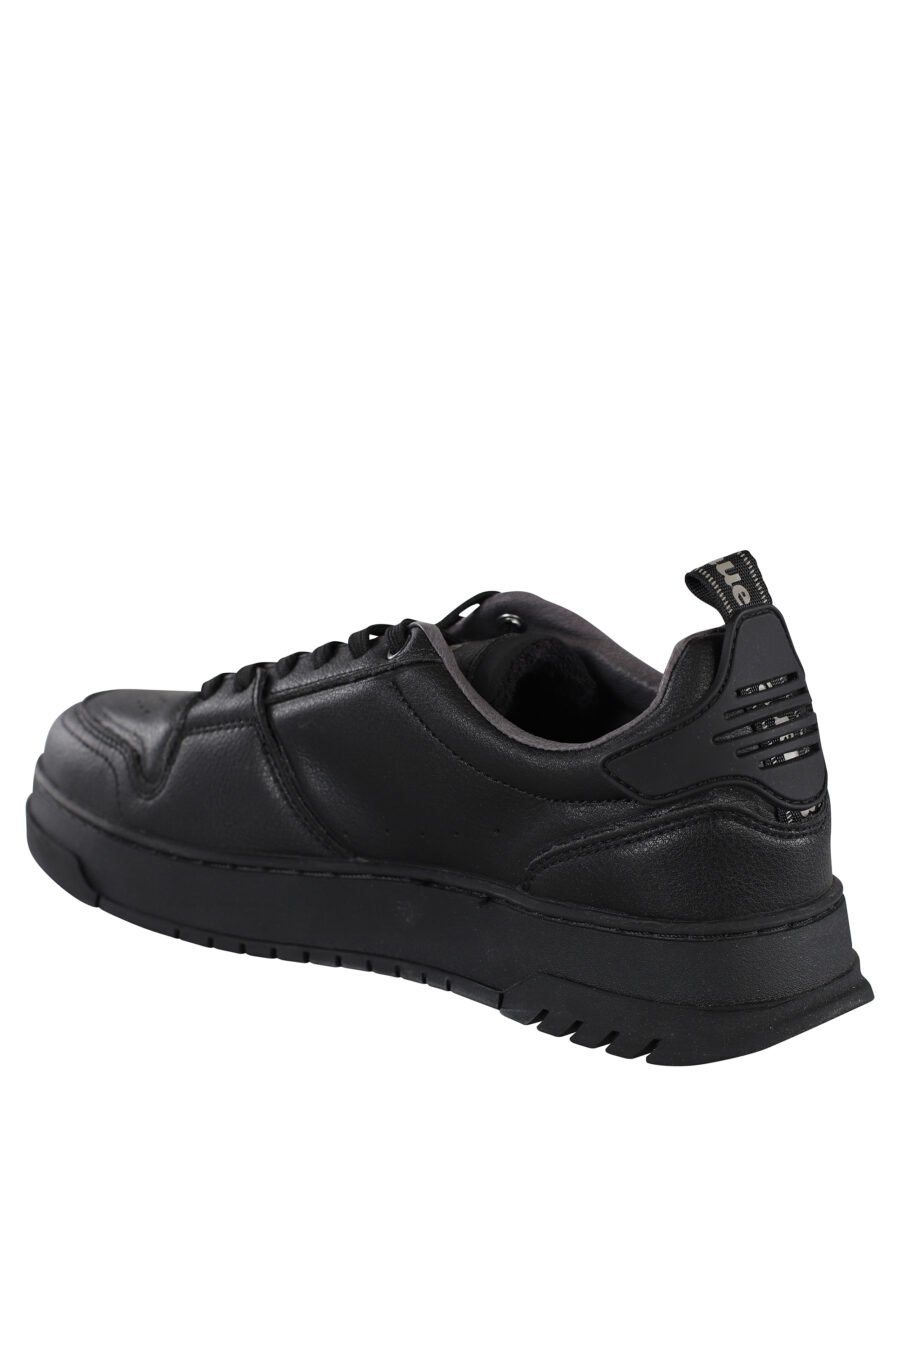 Trainers "harper" black leather with logo - IMG 6830